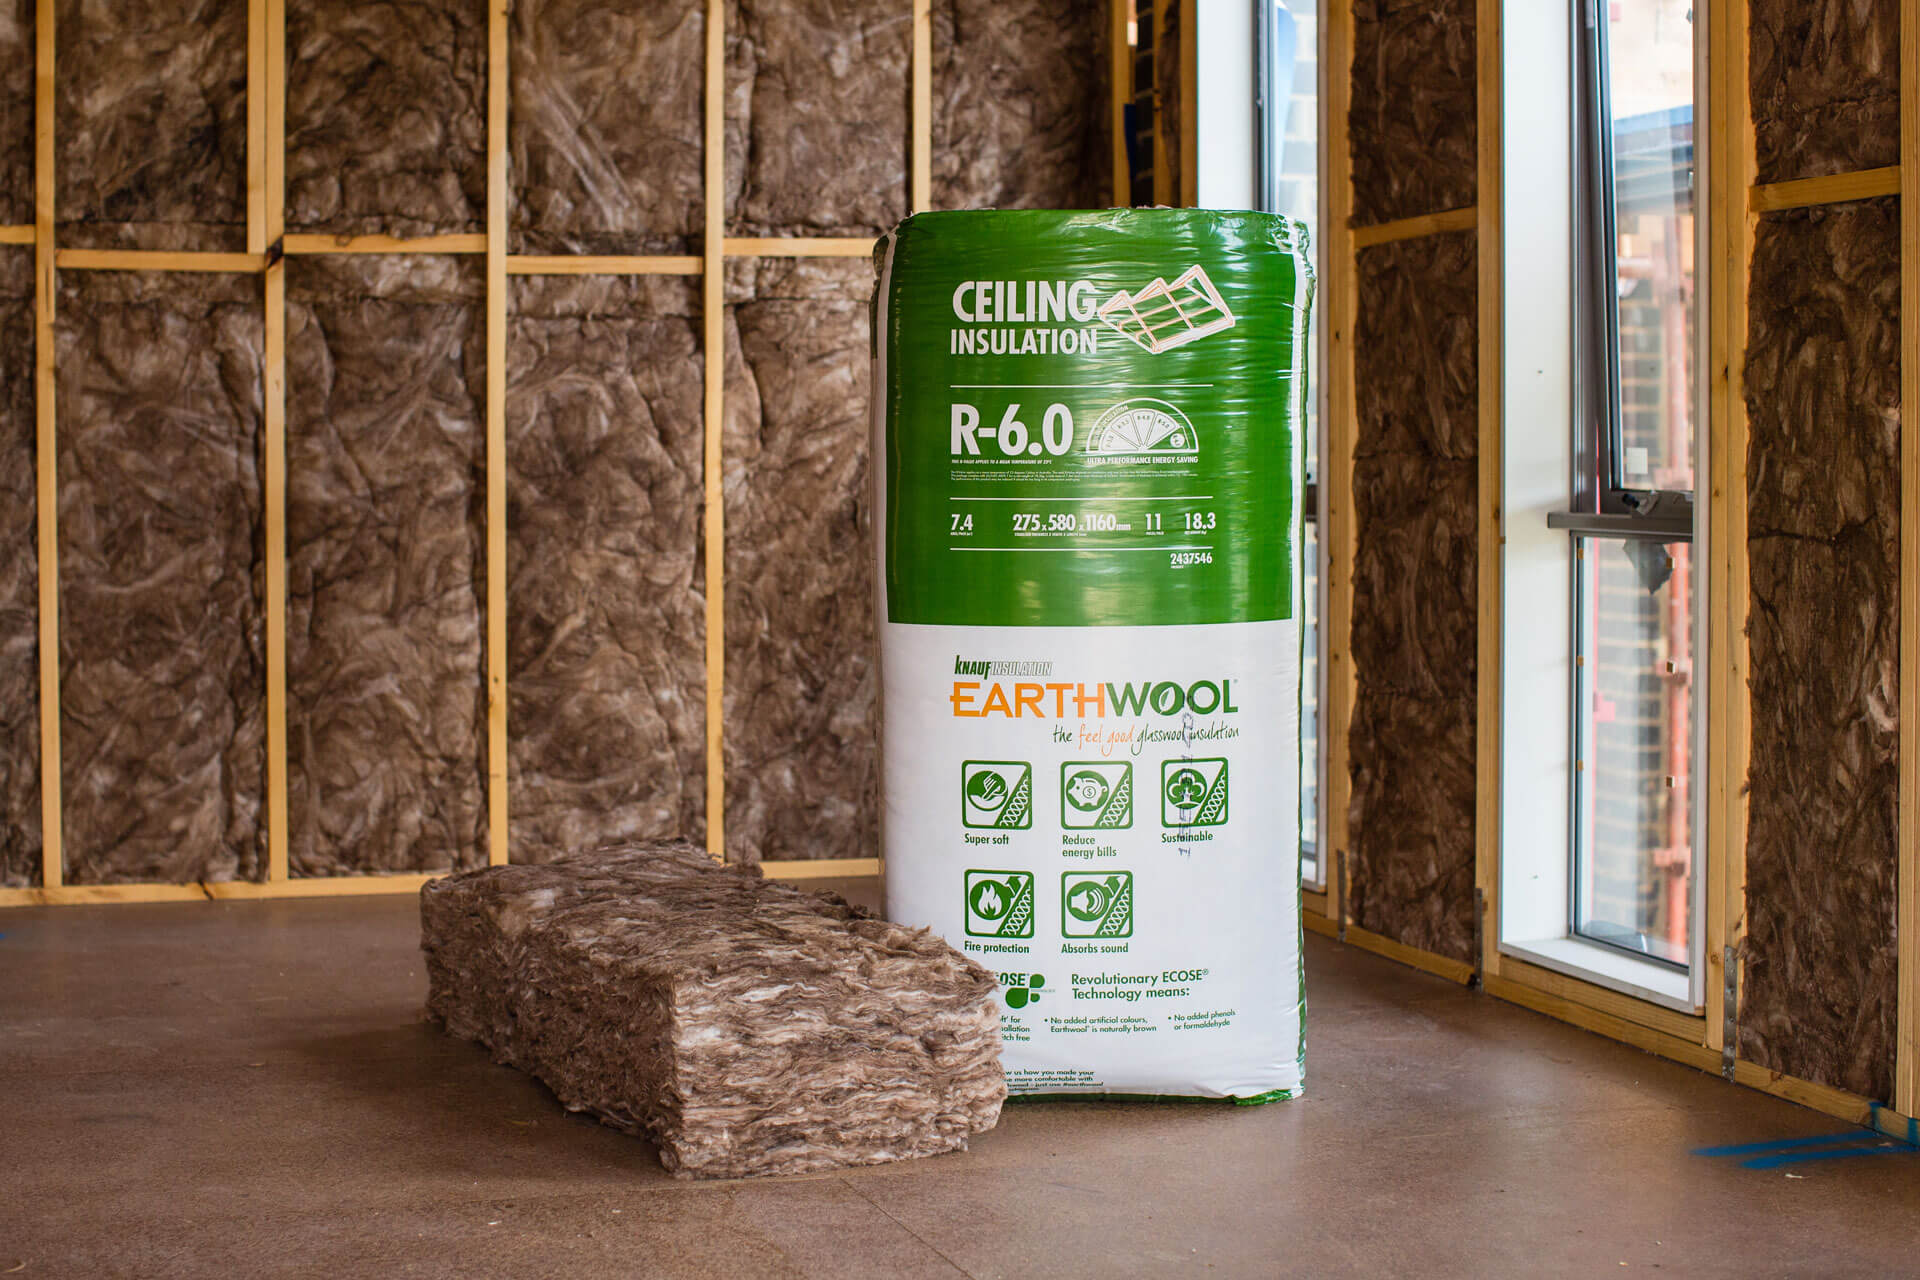 Buy Ceiling Insulation Online - R6.0 Insulation